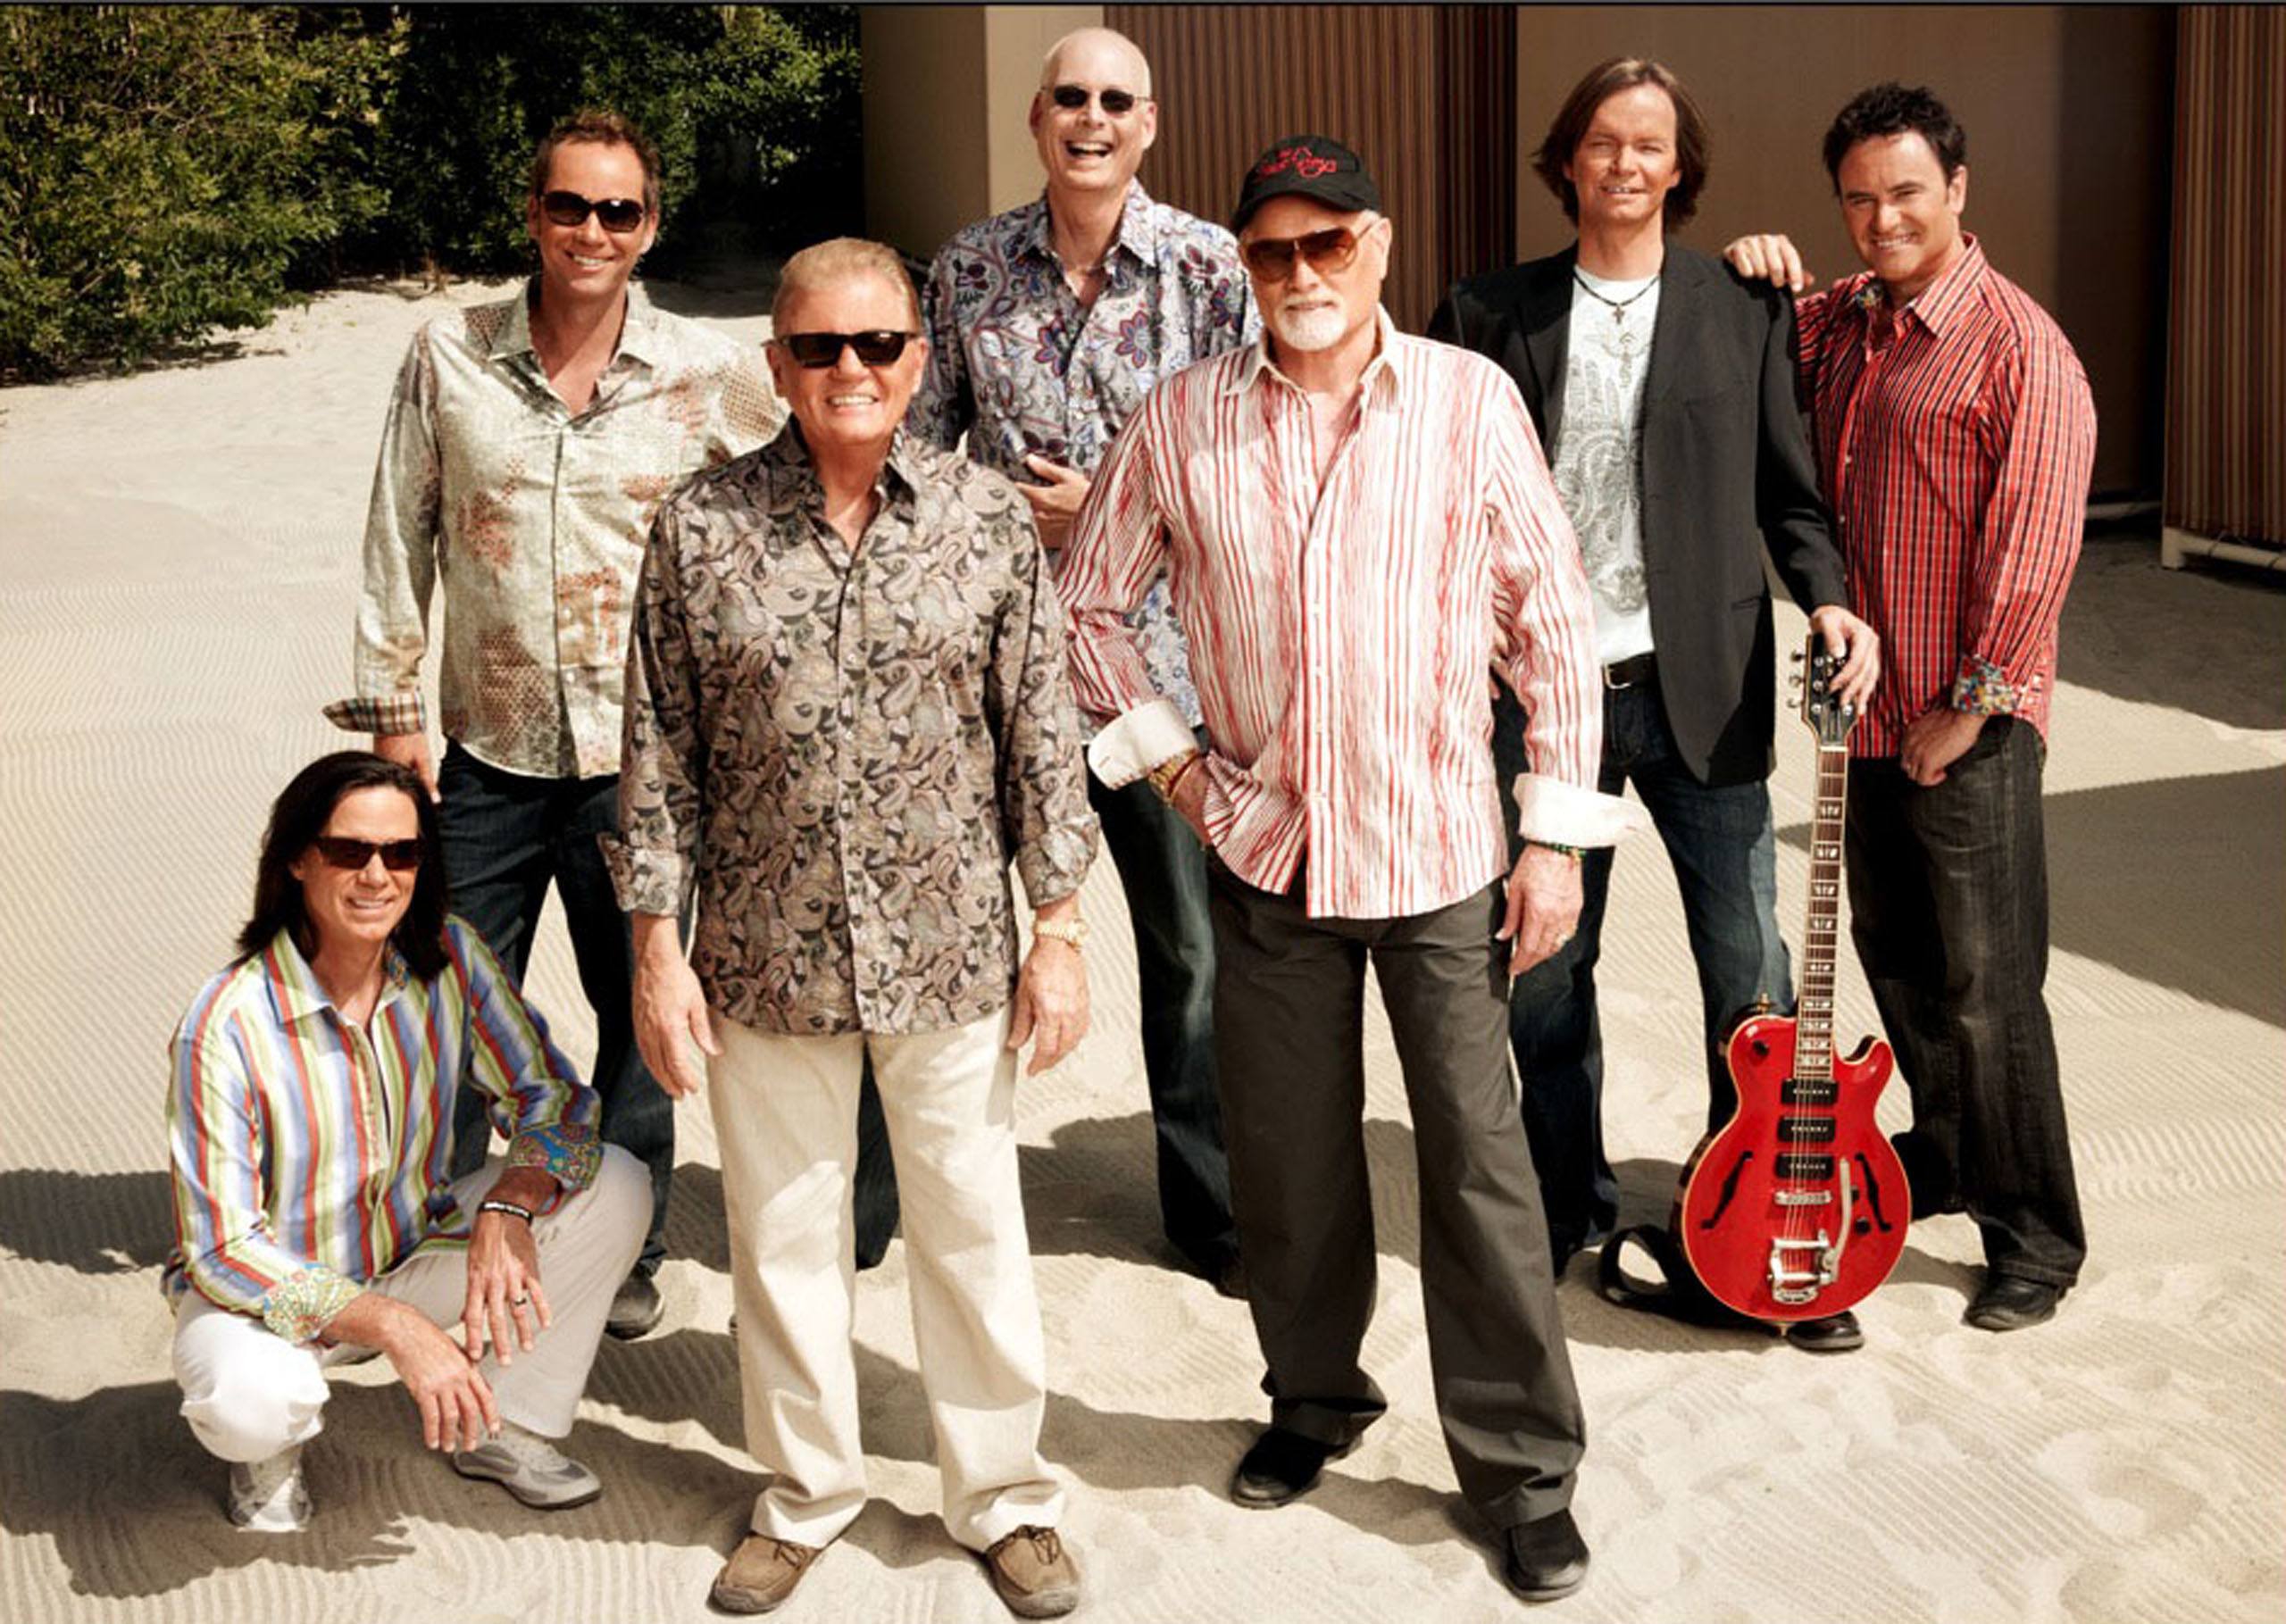 GOOD TIMES- The Beach Boys Band brings a collection of sunny classics to the Centrium Oct. 1.